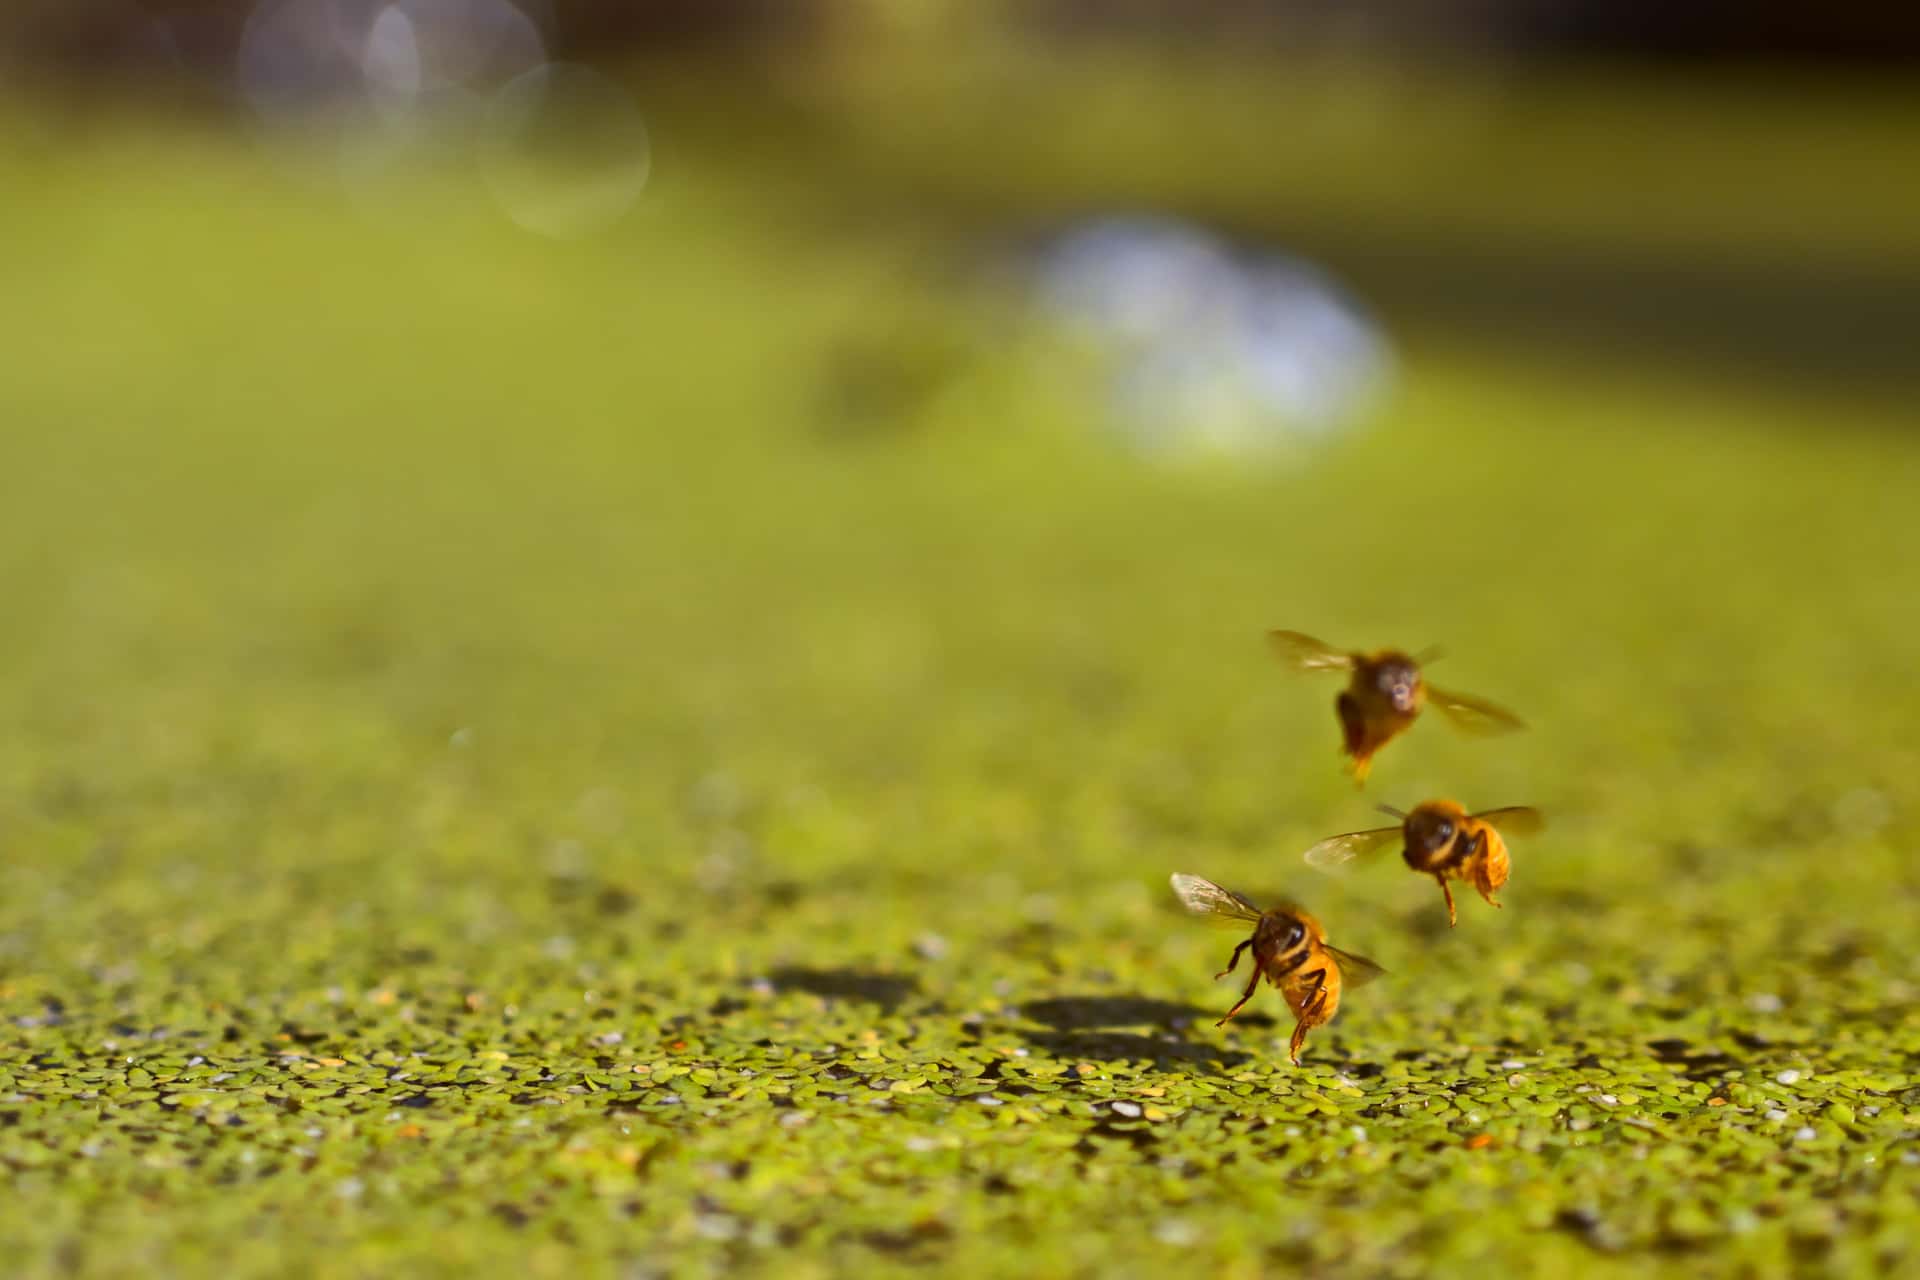 temporal composite of a honey bee landing on duckweed